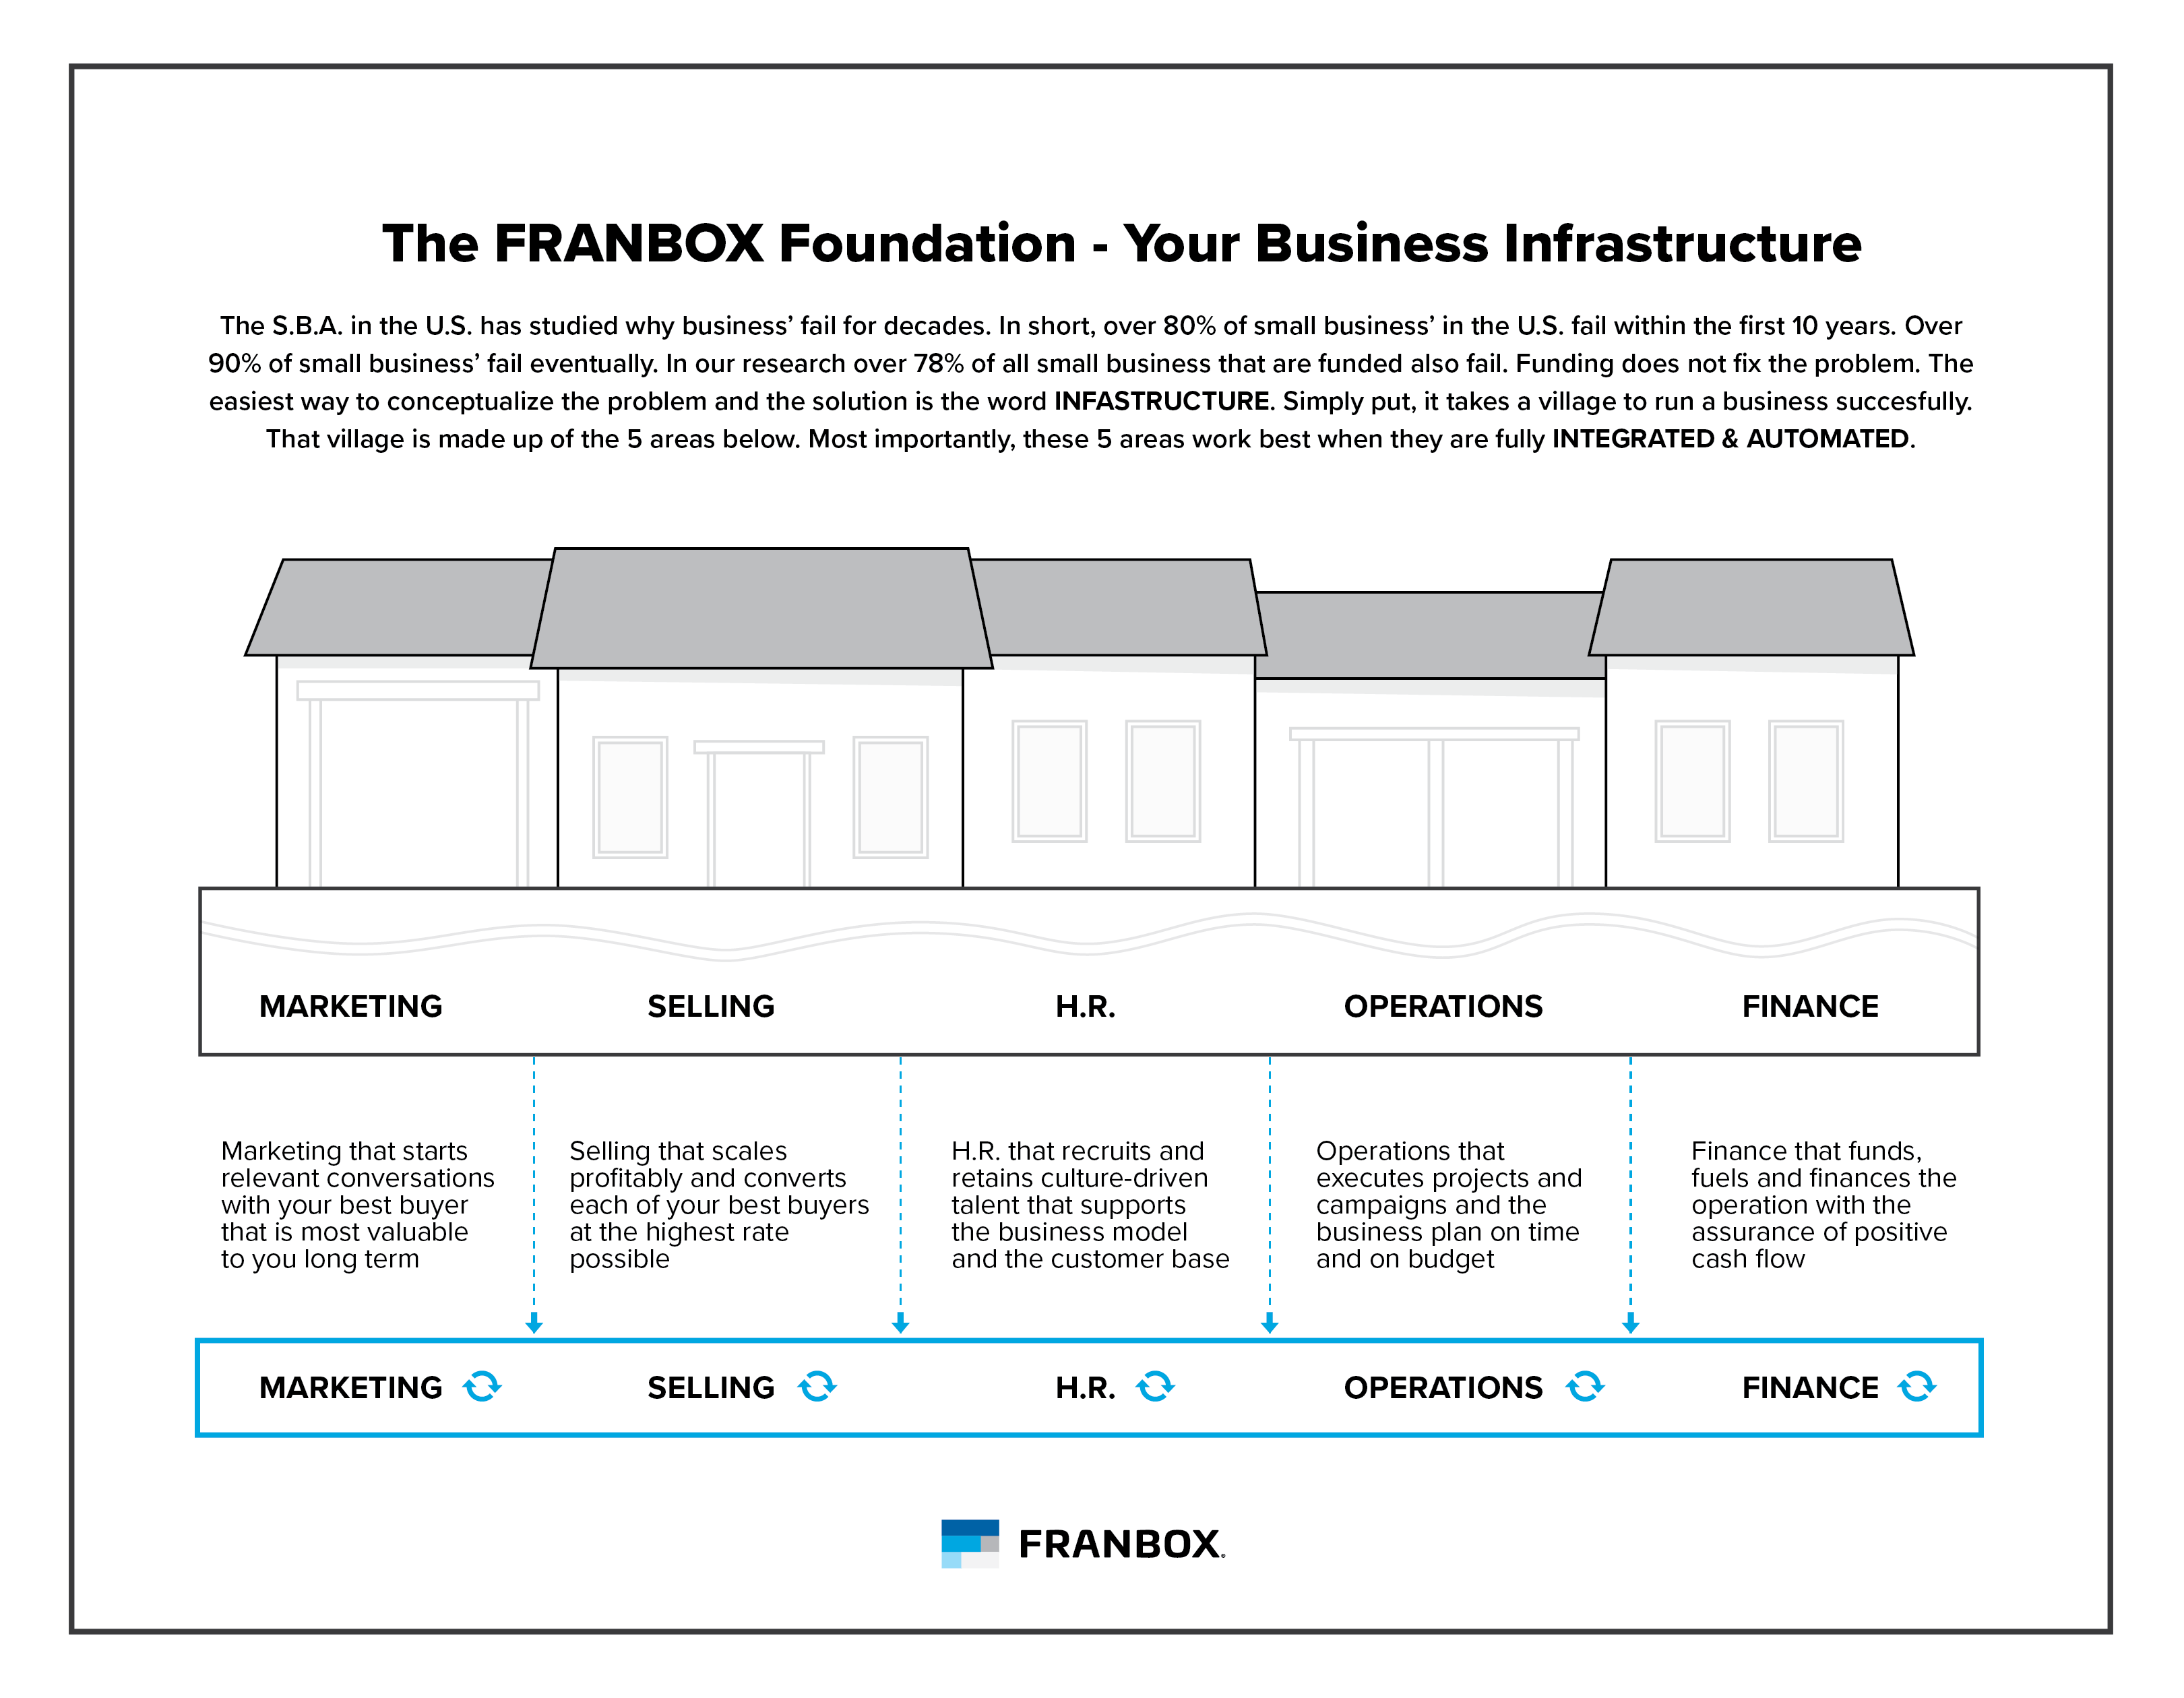 The Franbox Foundation